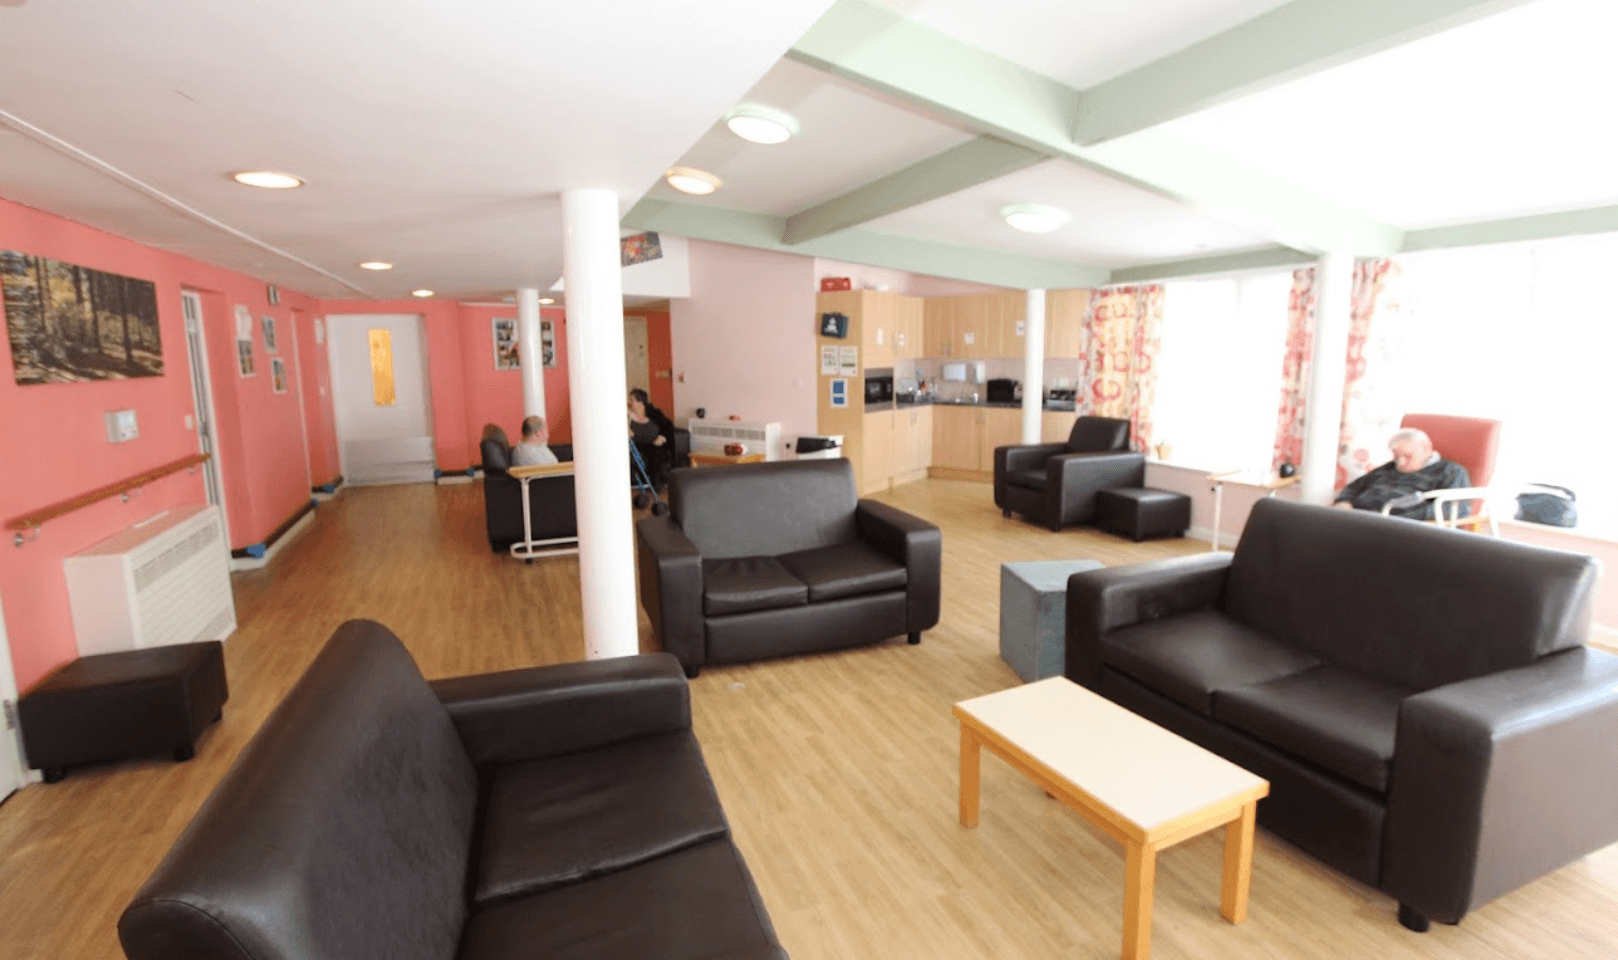 Shaw Healthcare - Wood House care home 001